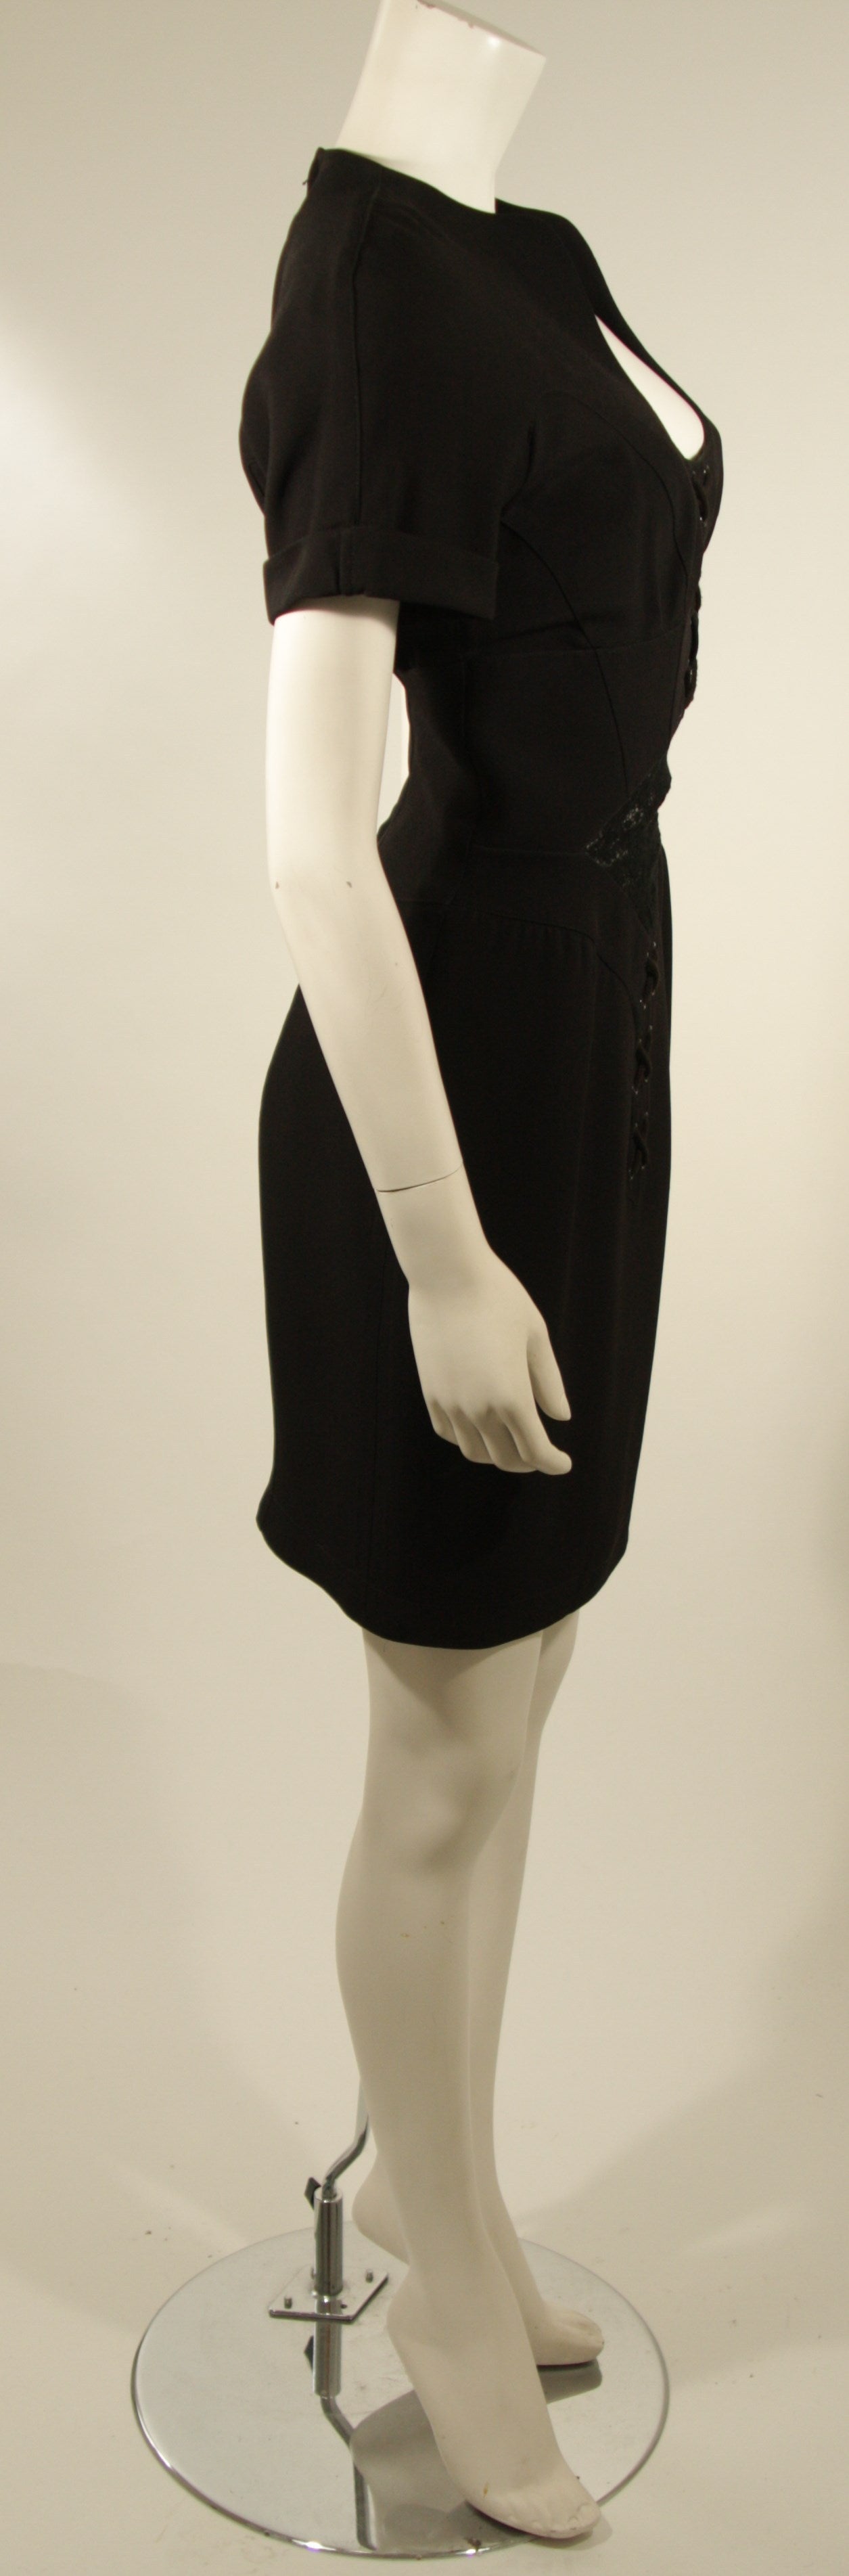 Theirry Mugler Black Cocktail Dress with Corset and Lace Details Size 40 2